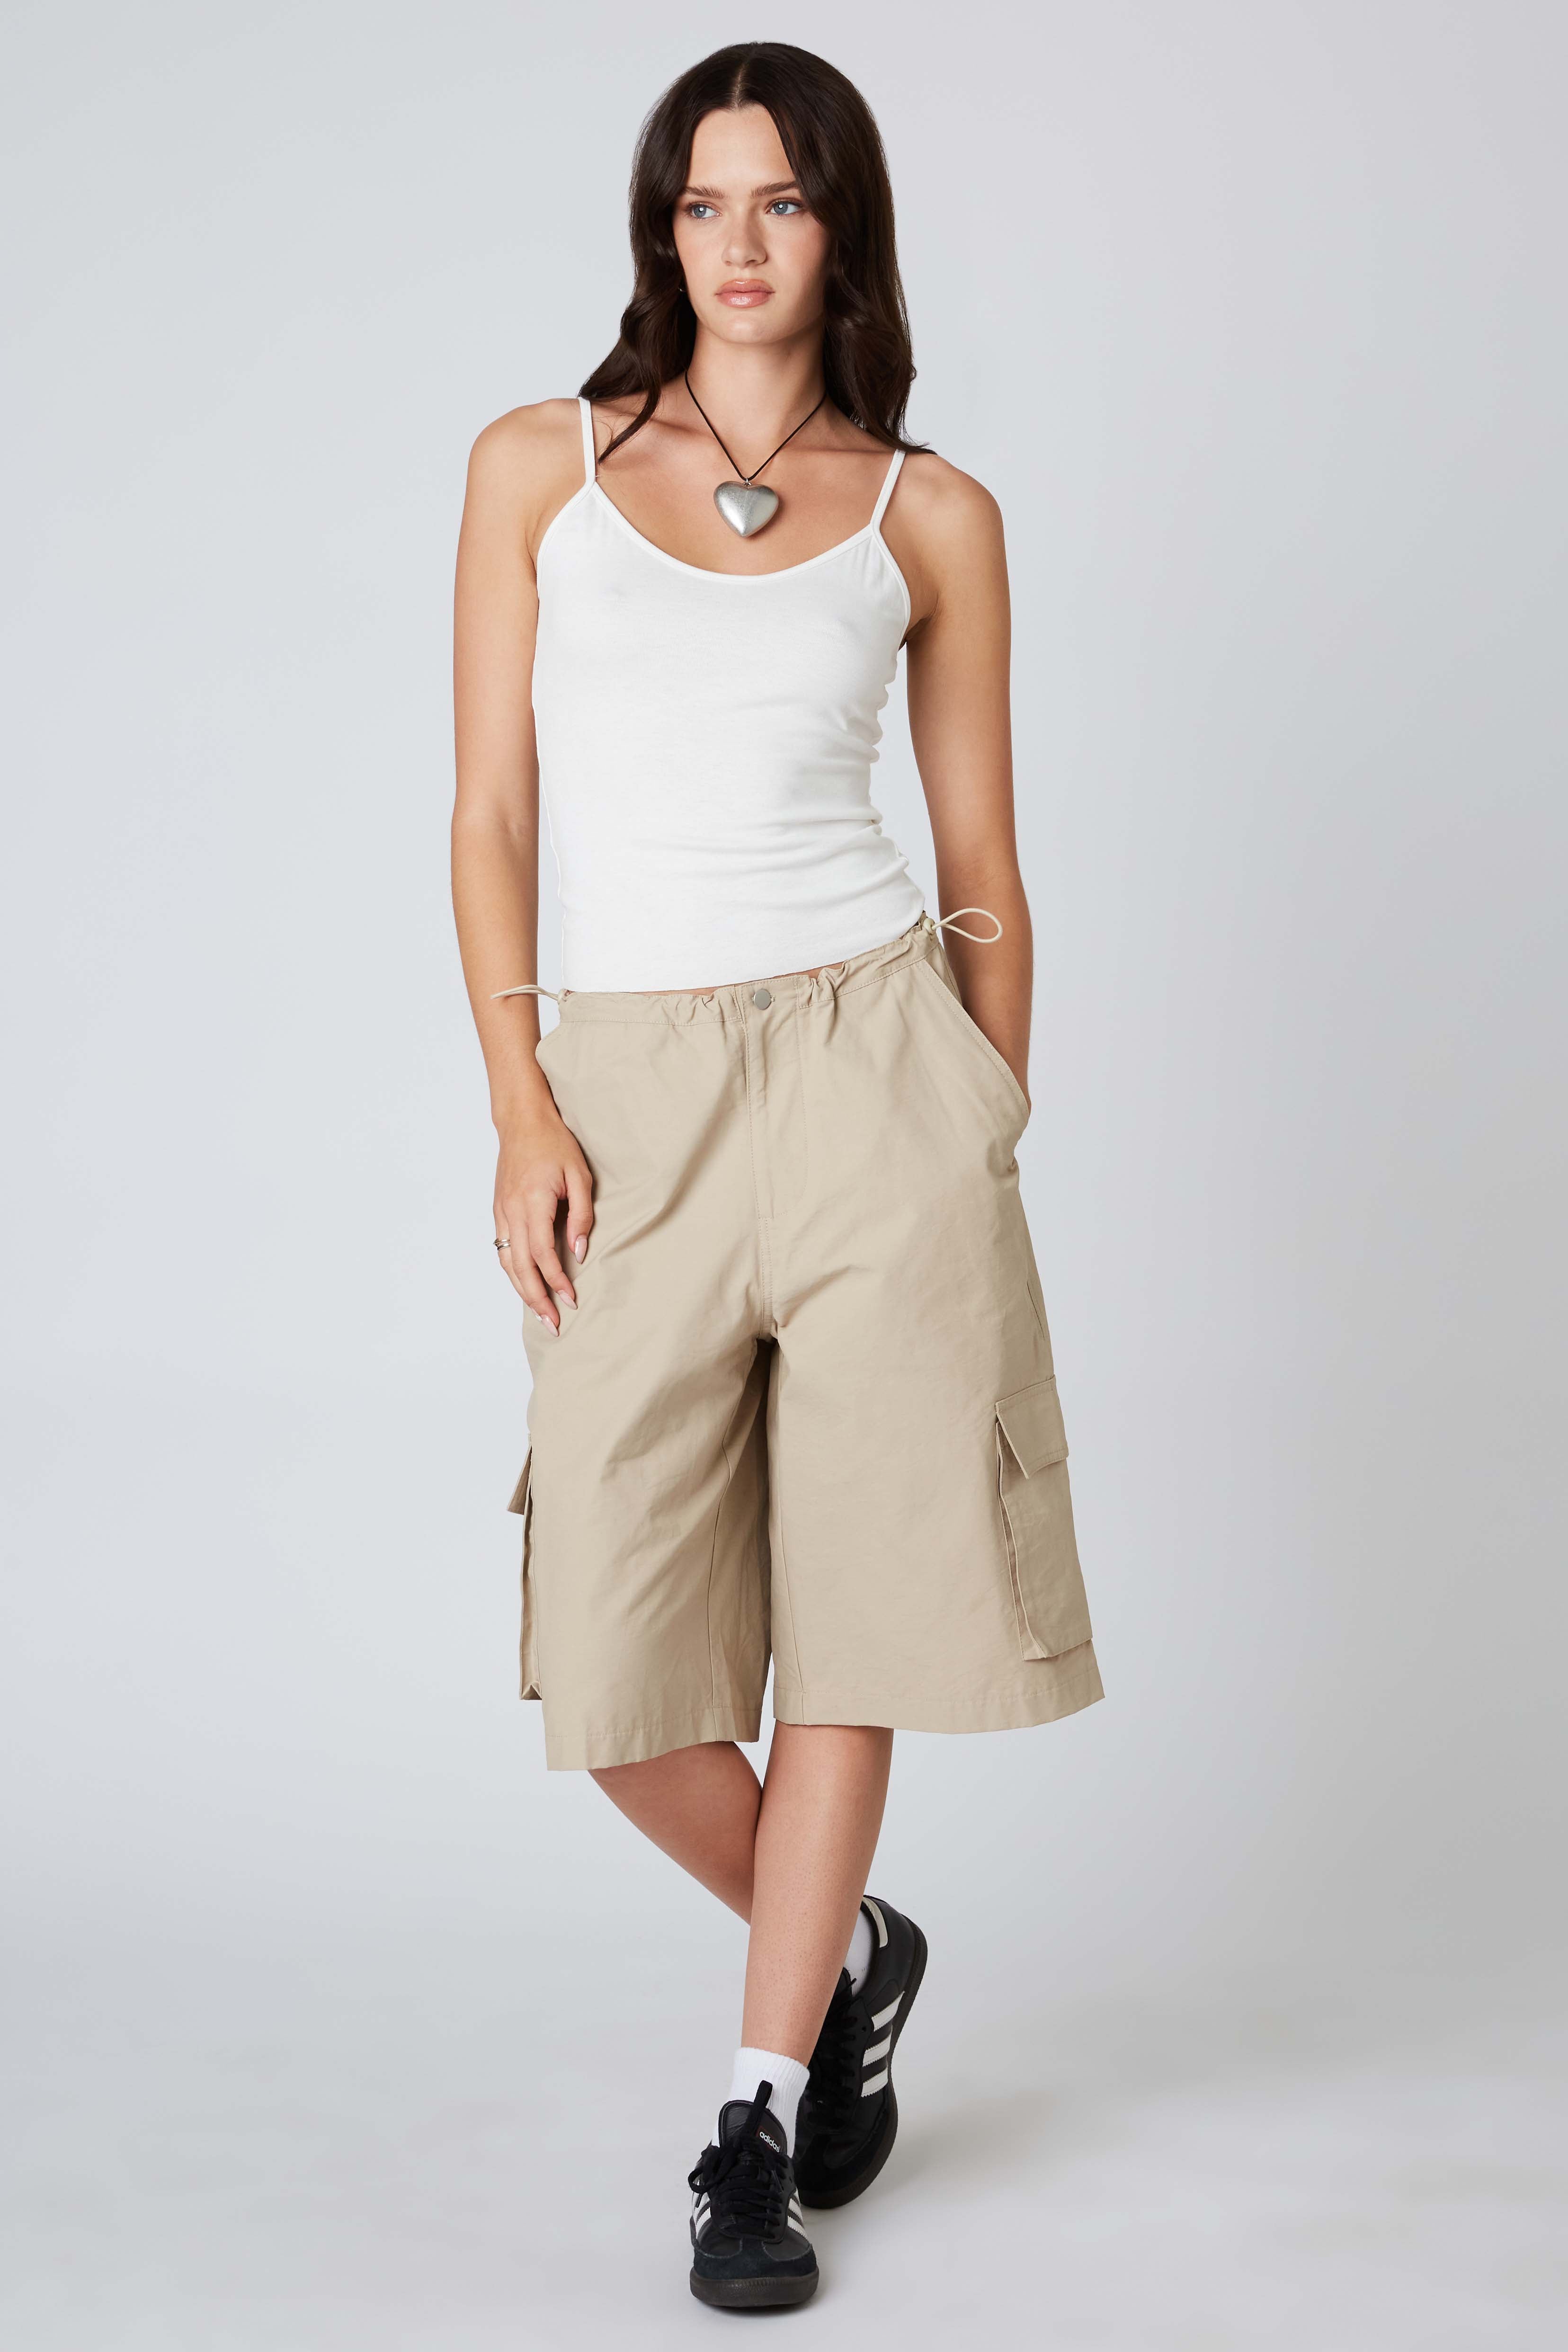 Cargo Shorts in Tan Front View